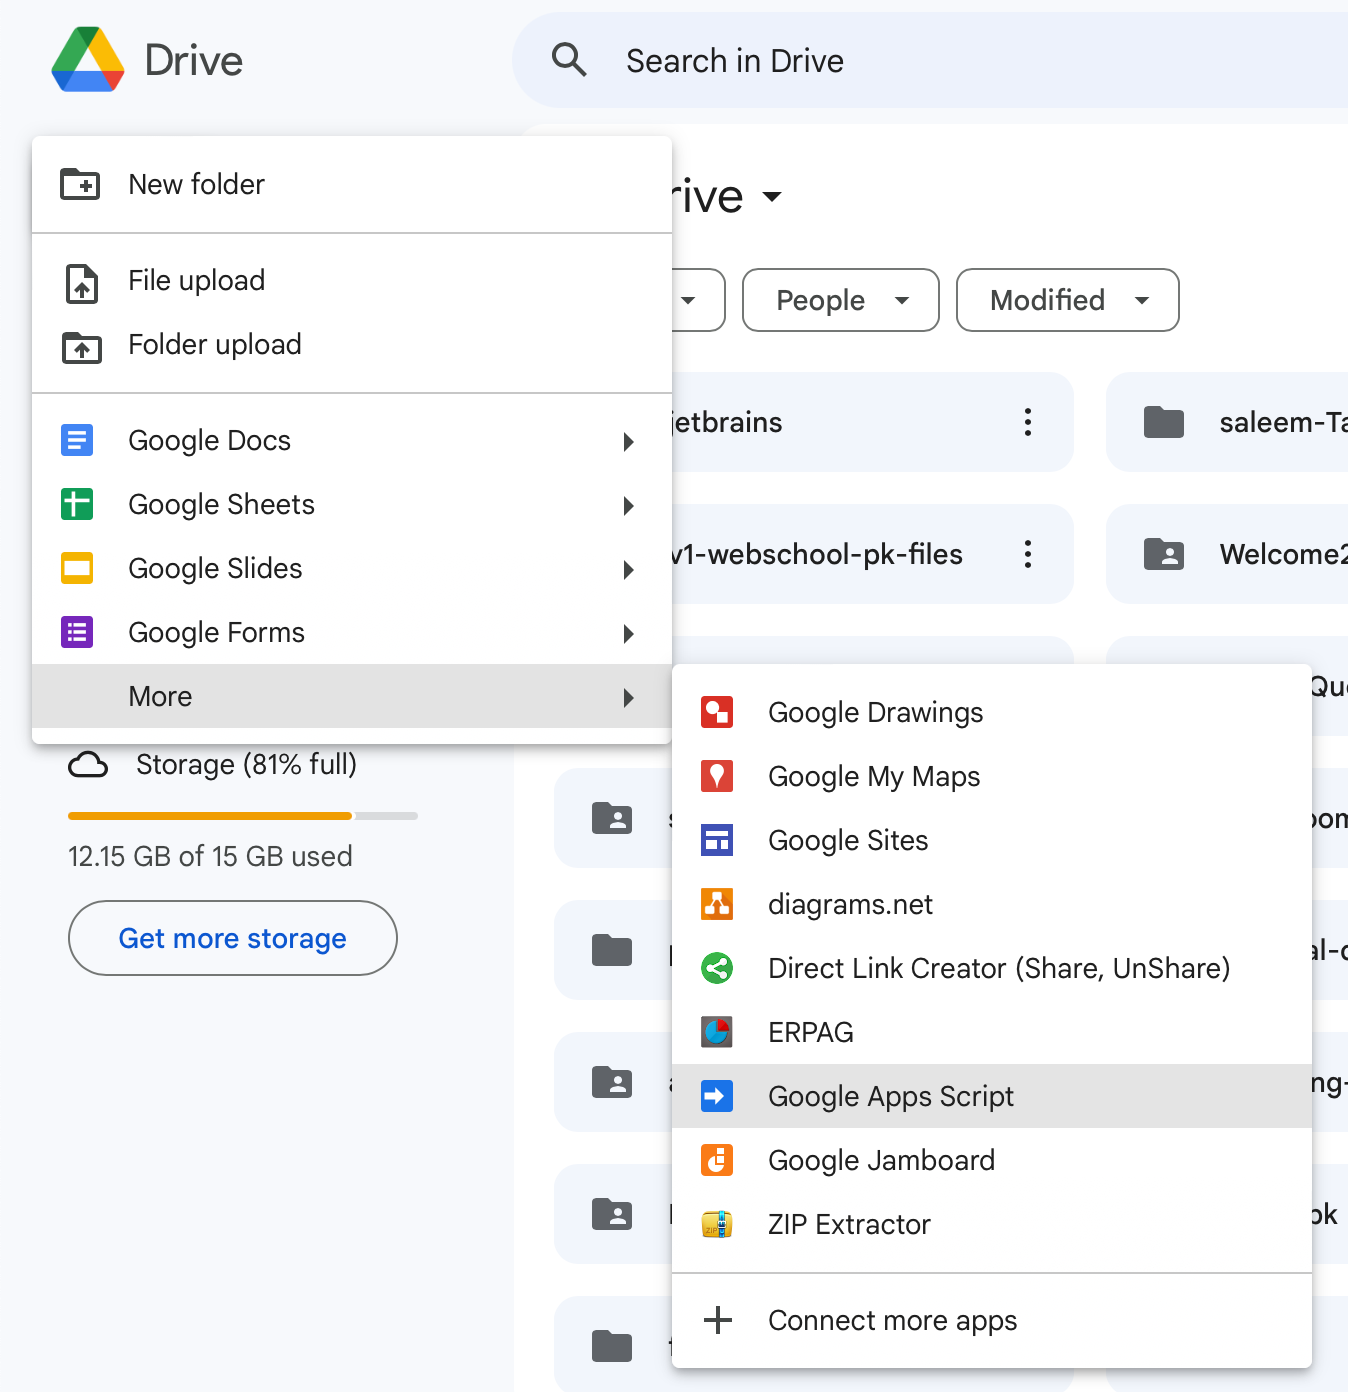 Upload files to Google Drive from Google Forms, Apps Script